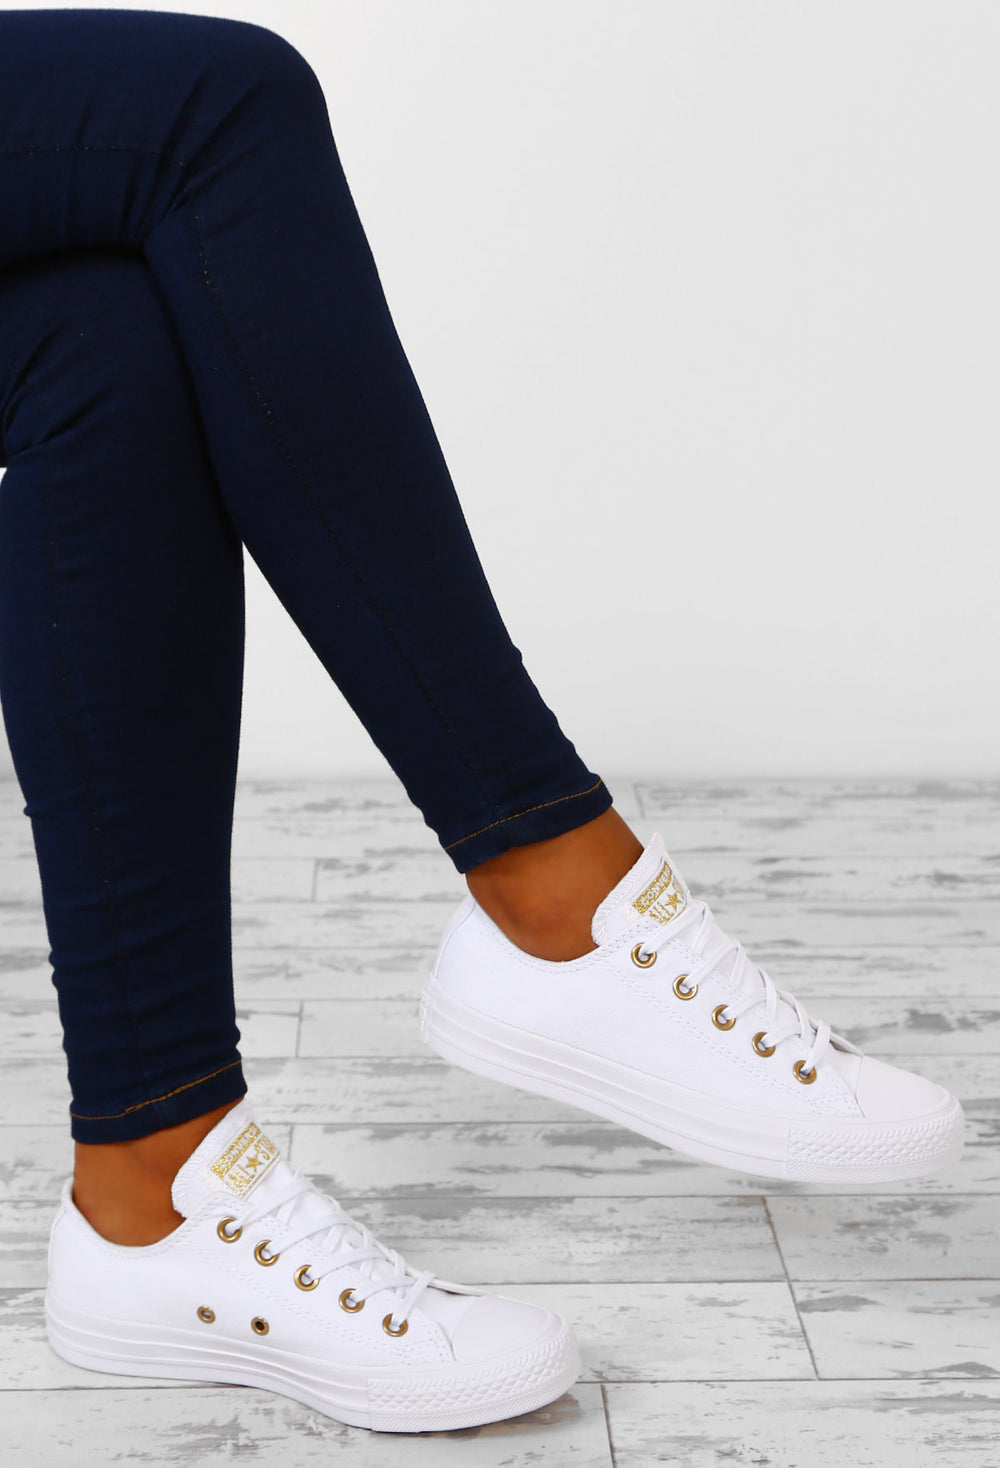 white and gold chuck taylors